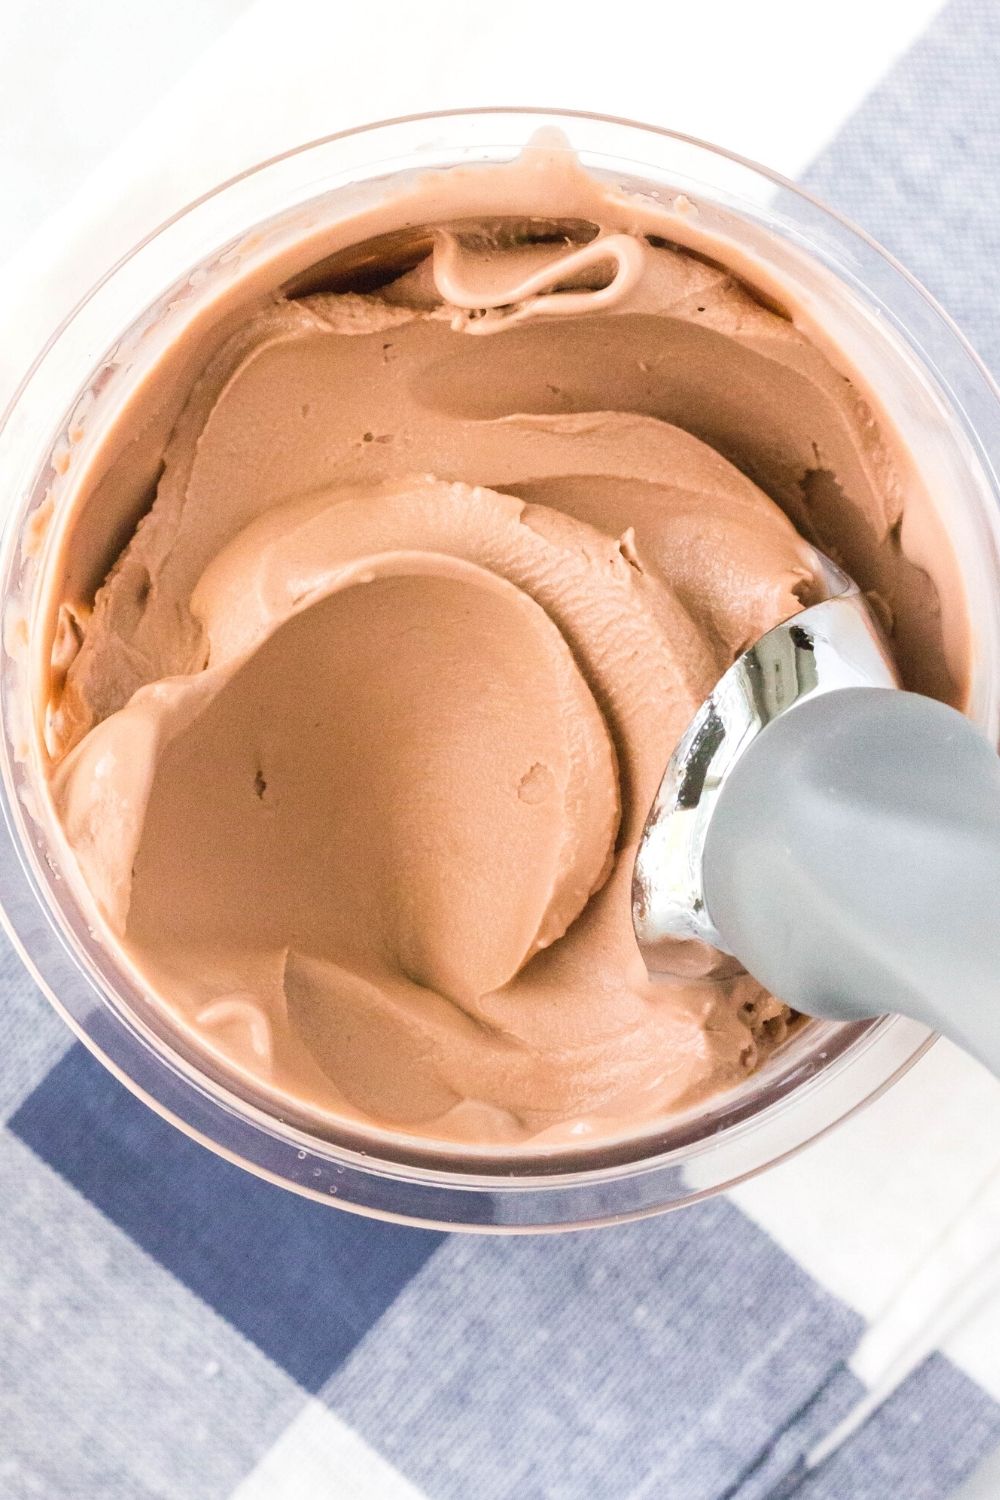 overhead view of the top of a Ninja Creami pint filled with chocolate pudding ice cream. An ice cream scoop swirls the top of the ice cream, showing its creamy, silky texture.